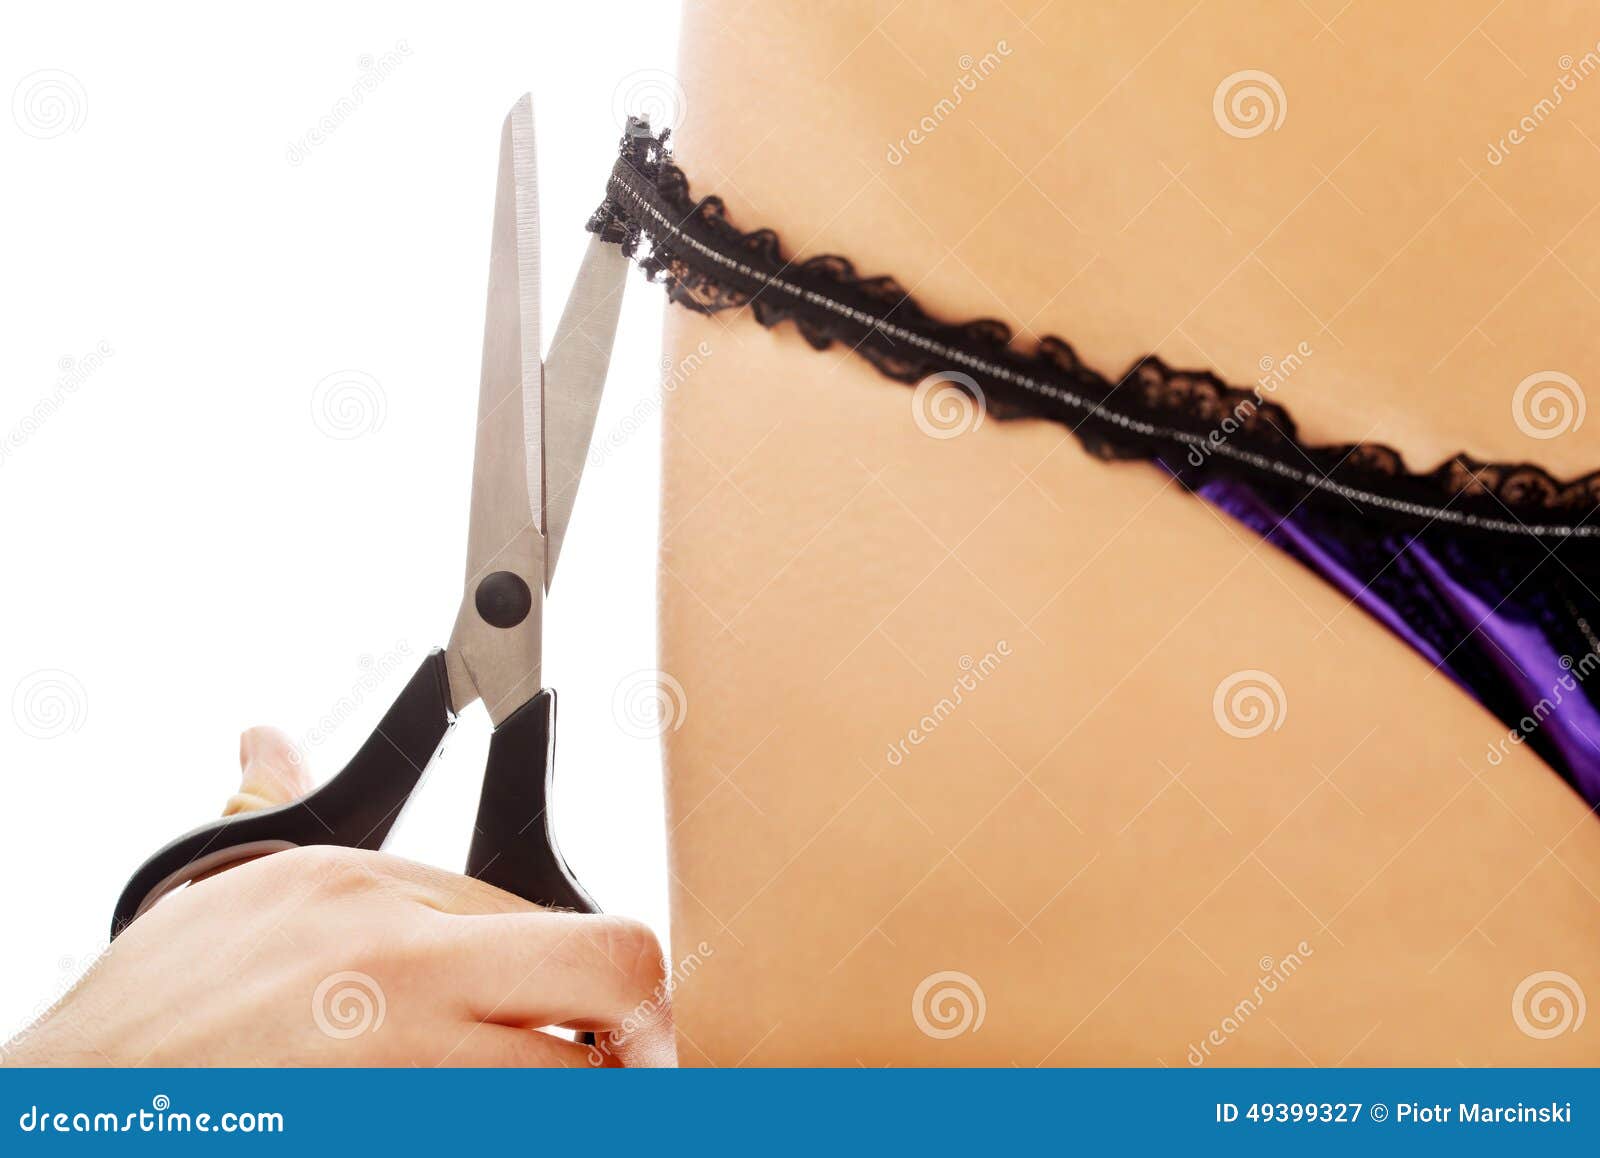 Men Hand Cutting Off Women Lingerie. Stock Image - Image of couple, person:  49399327